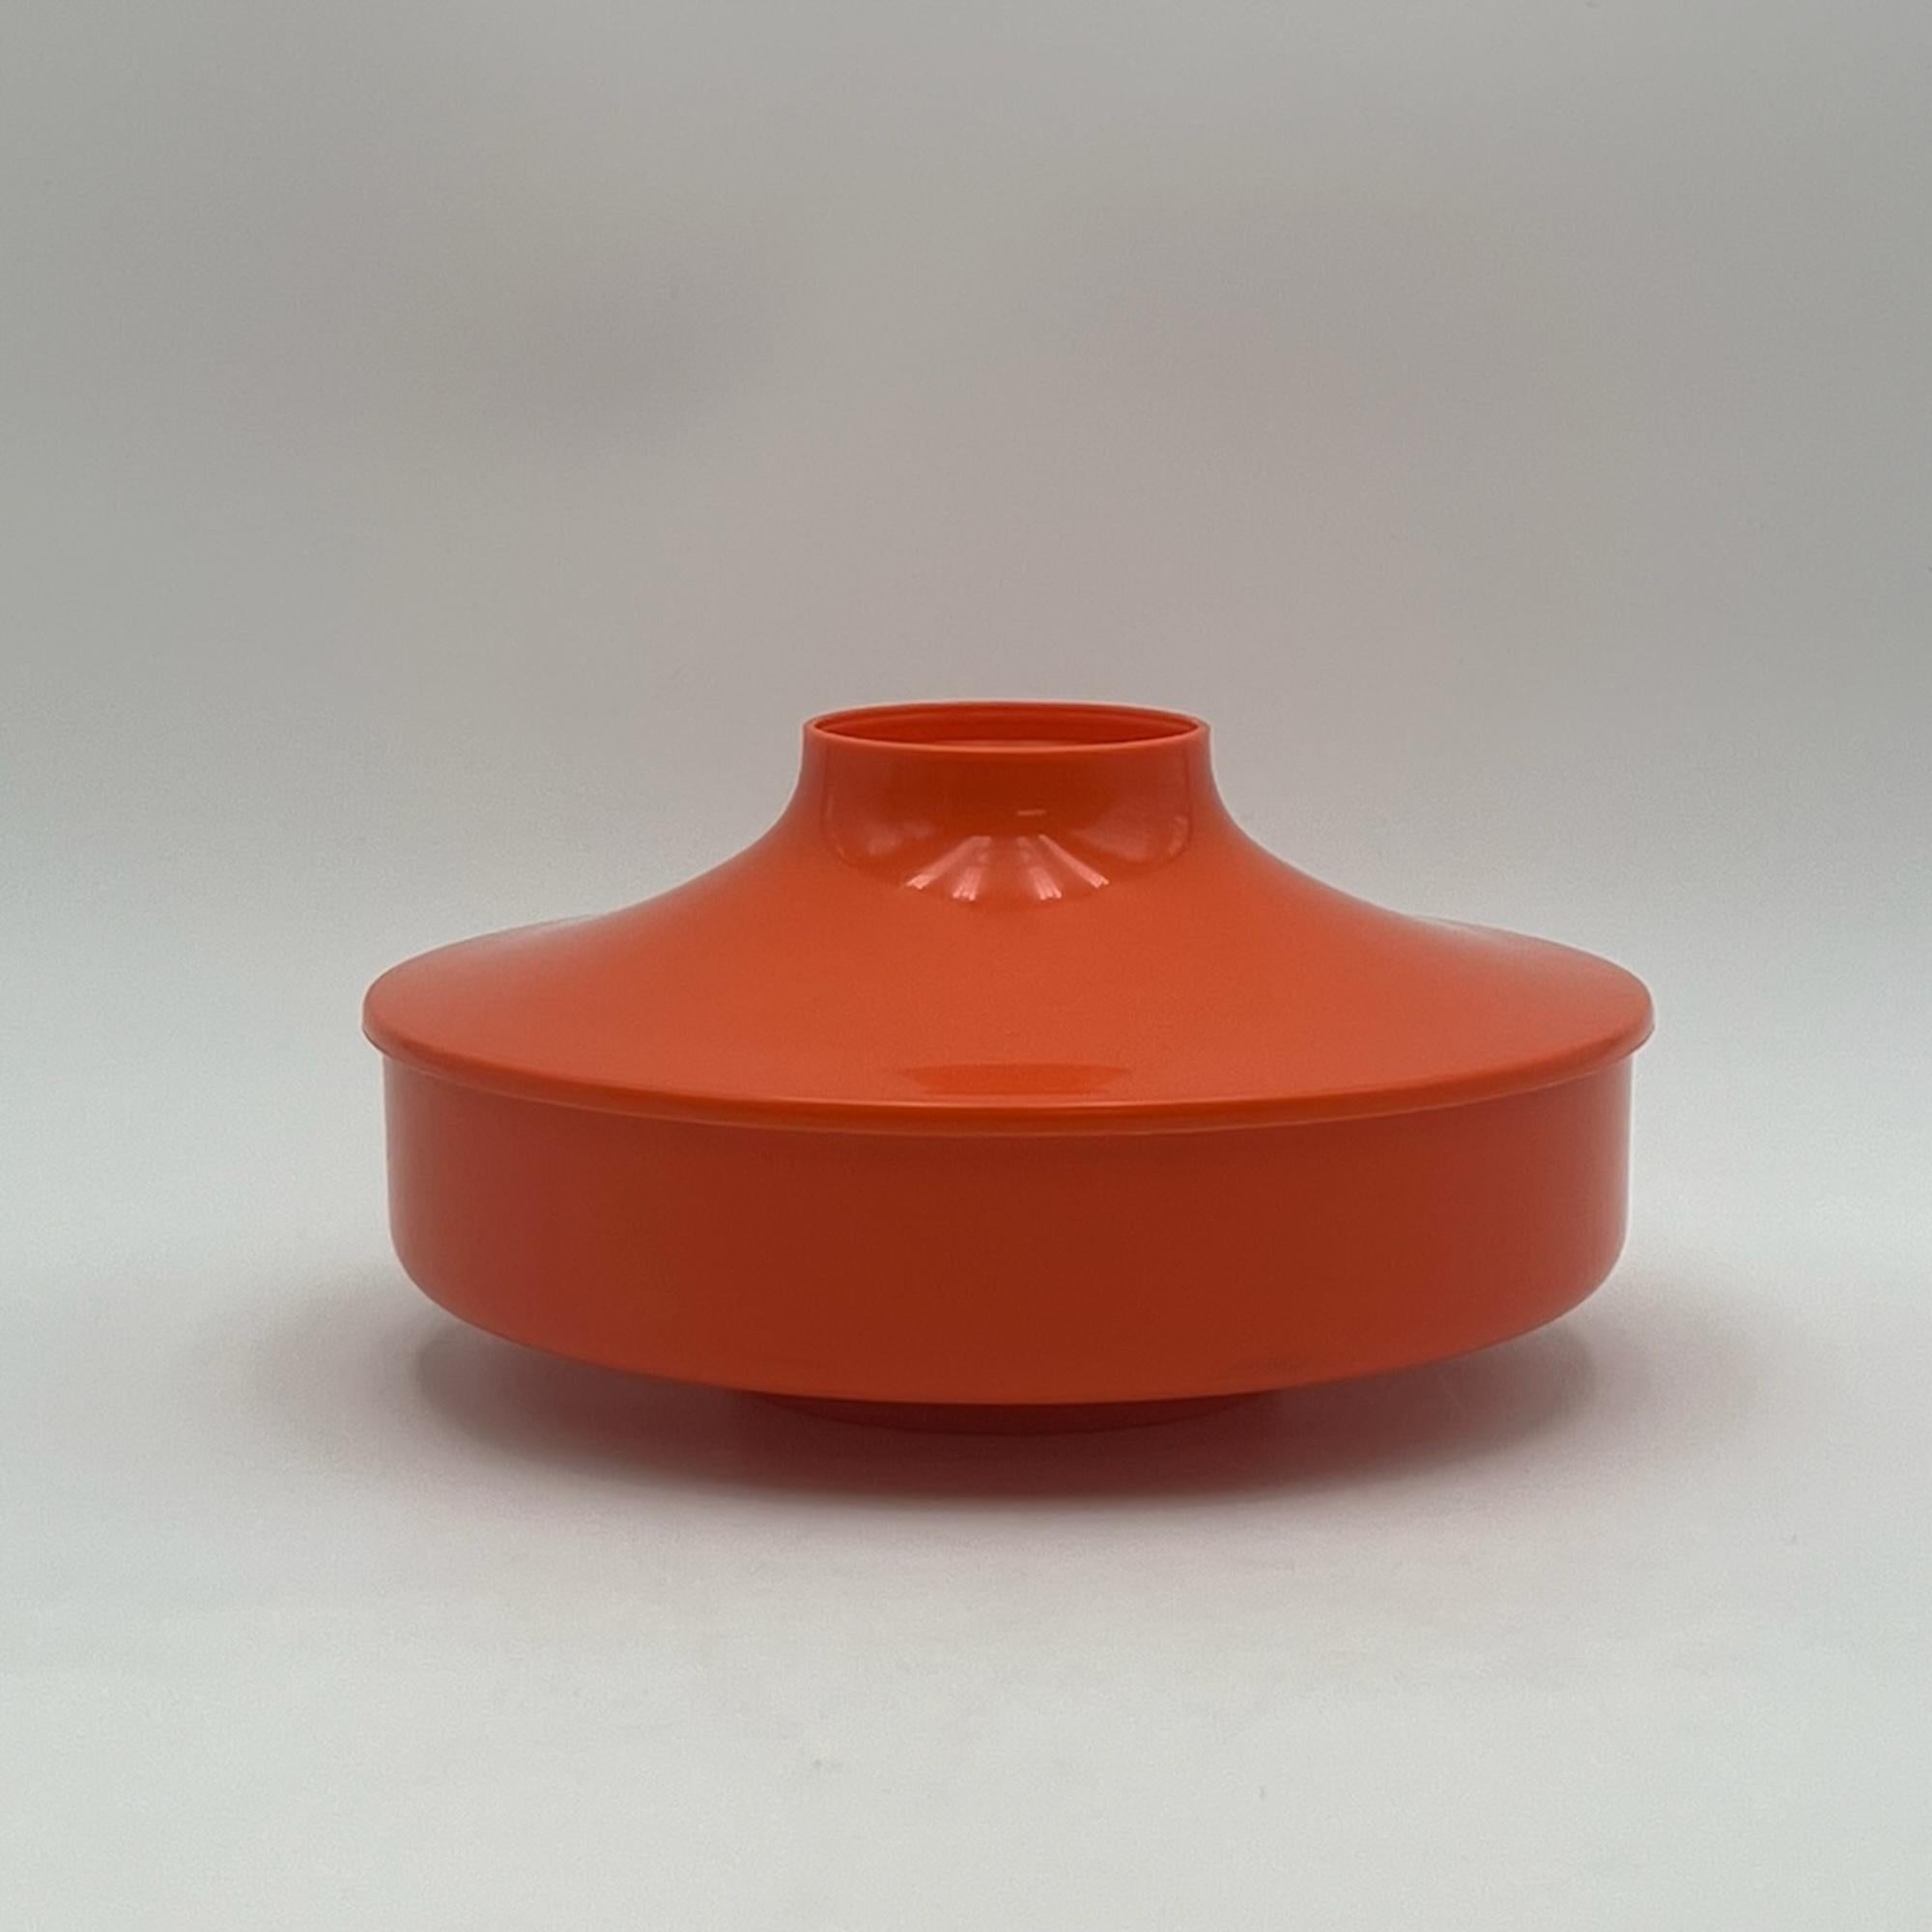 Iconic space age plastic jar designed by Luigi Massoni for Guzzini. 

This flying saucer shaped jar was produced by Guzzini for the renowned chocolate factory Venchi, founded in Turin in 1878.

The bright orange hue, the UFO-like shape and the